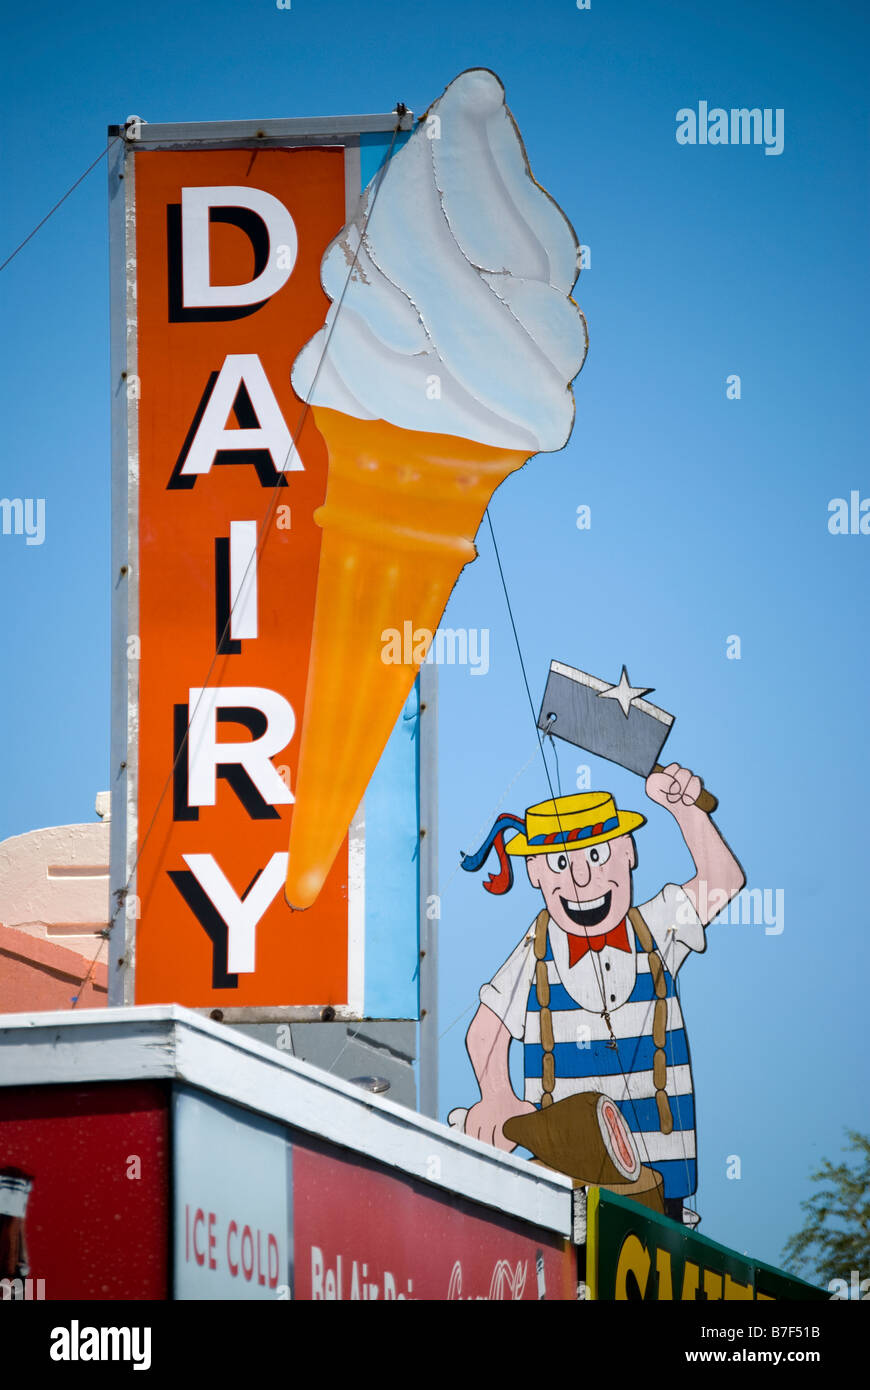 Old Dairy and Butcher's sign, East Street, Ashburton, Canterbury, New Zealand Stock Photo